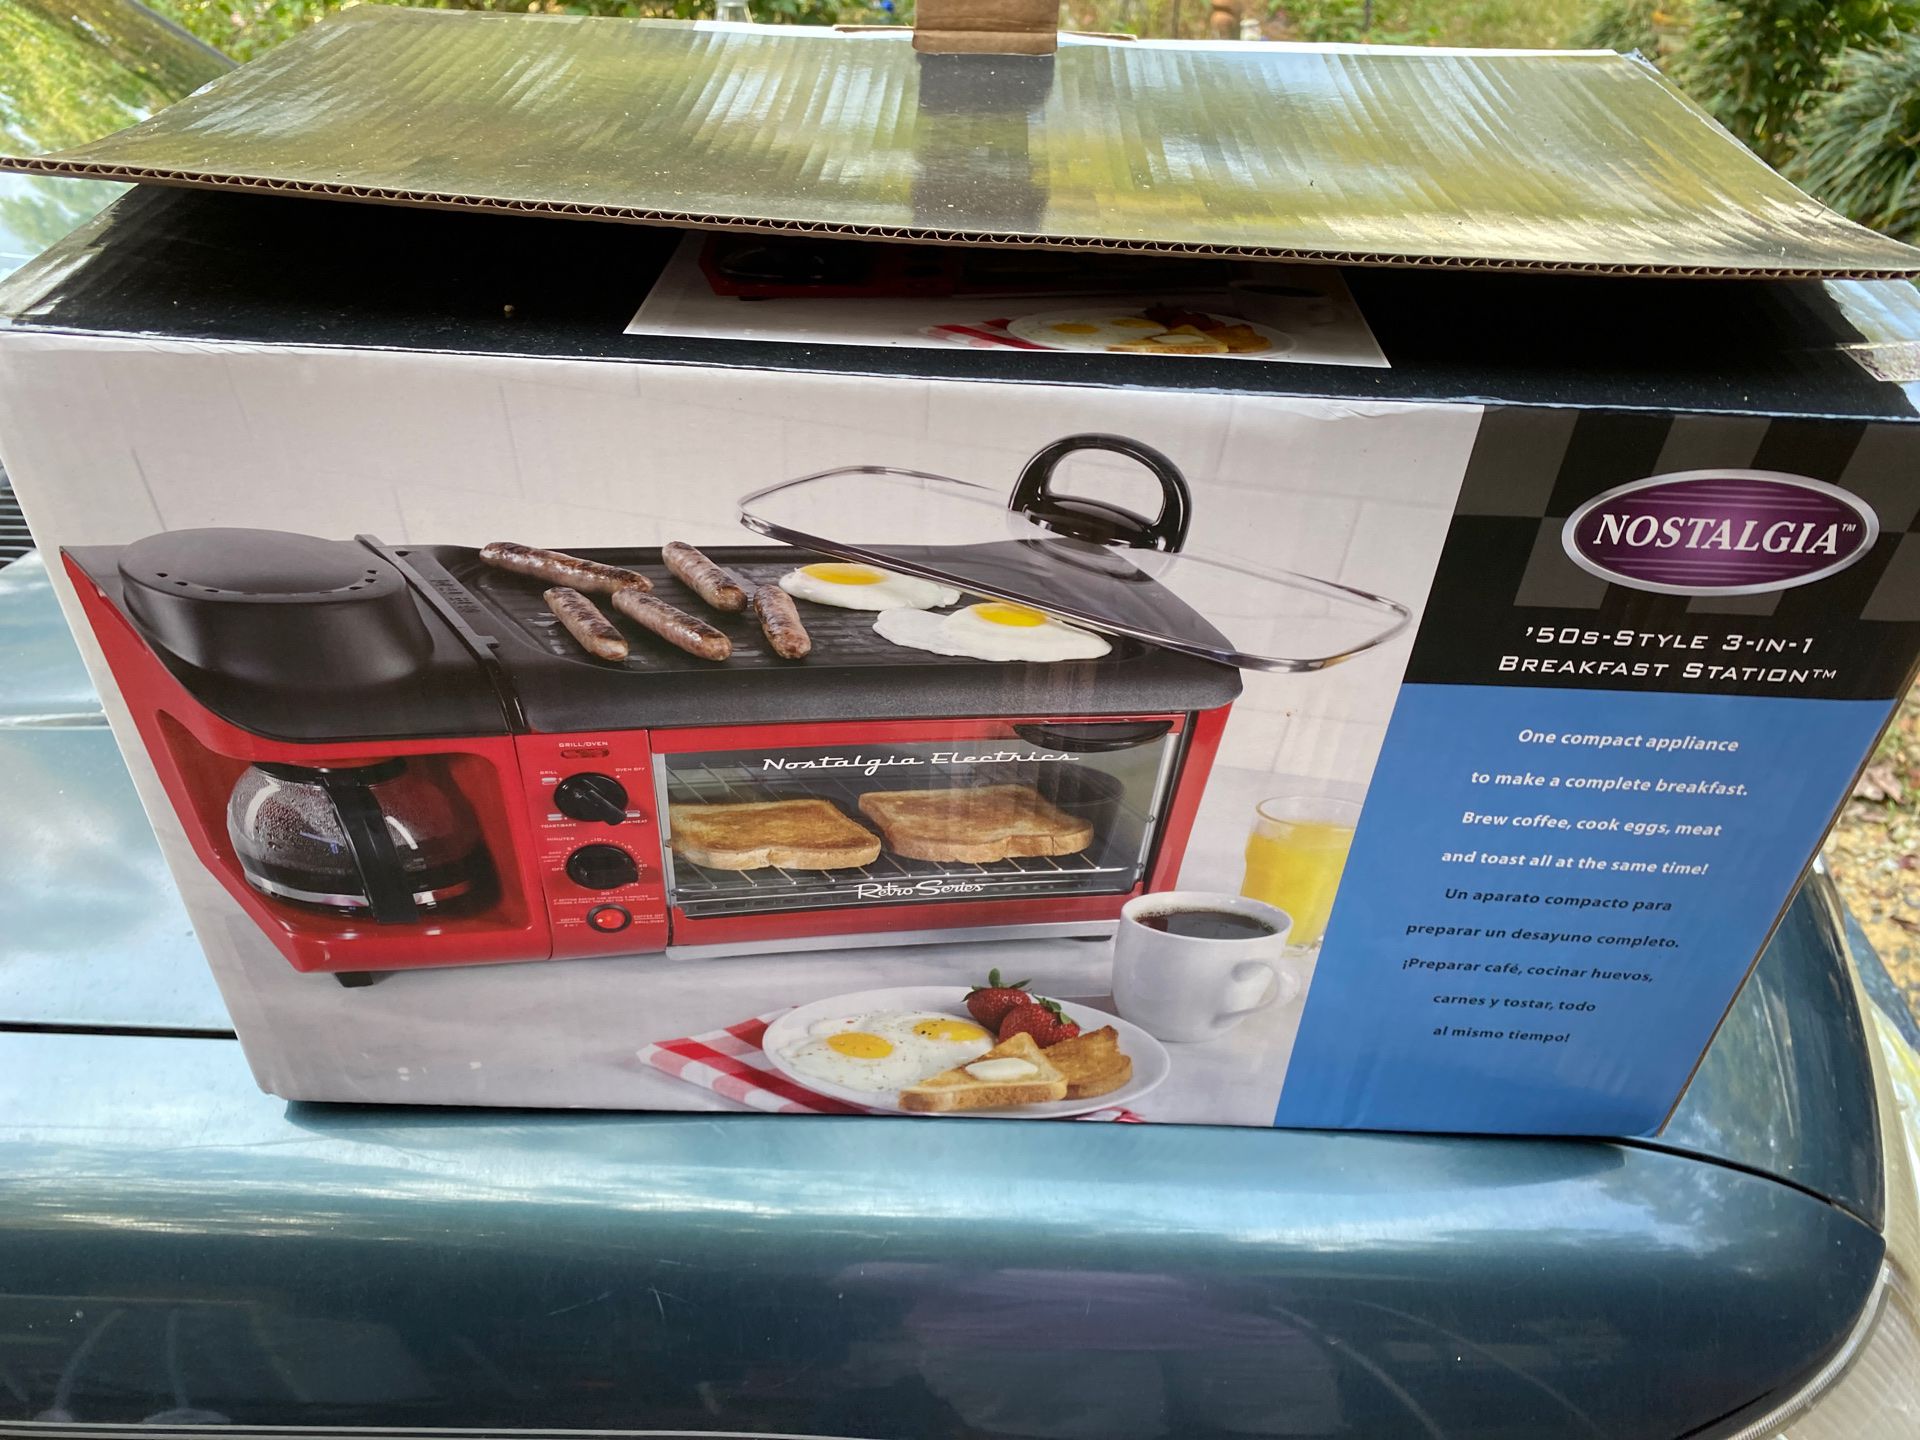 New cooker